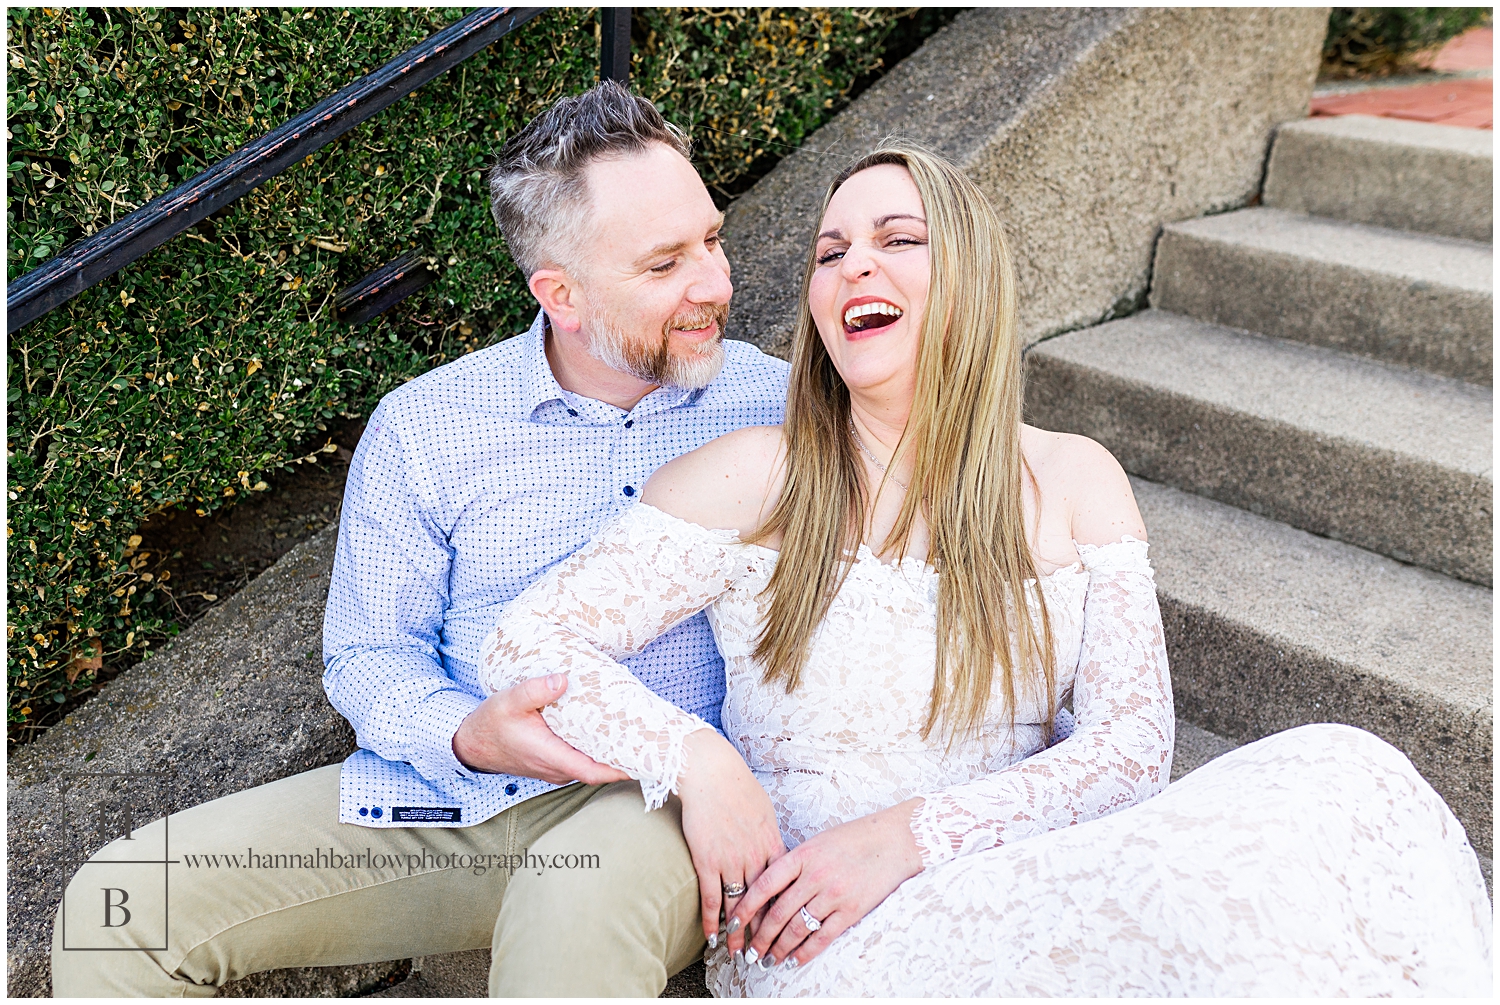 Girl in white lace dress laughs while being embraced by fiancé on stone steps.